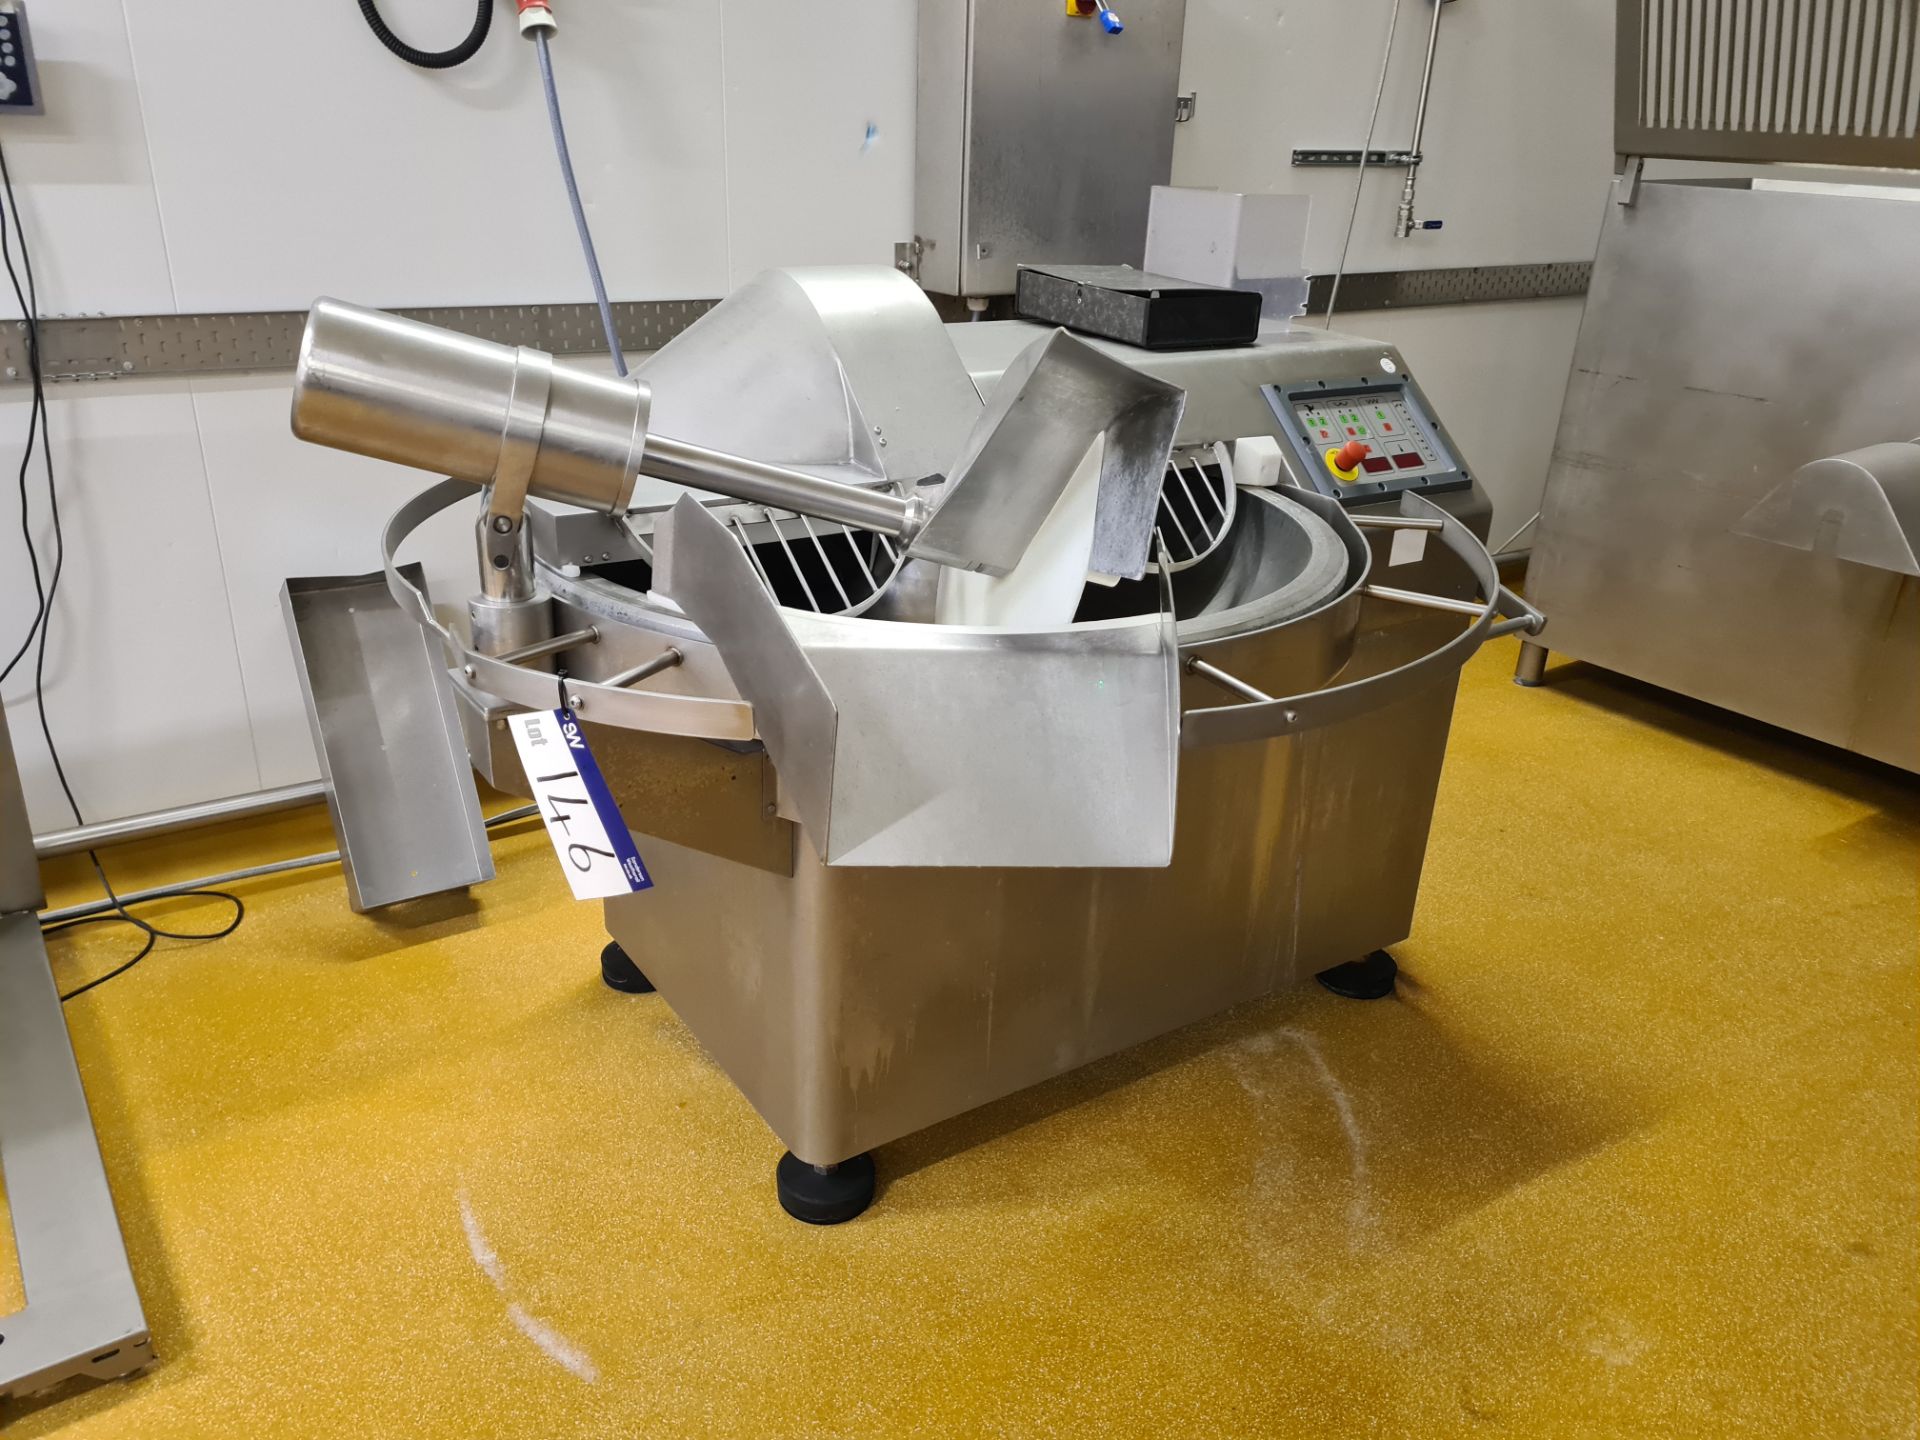 Stephamal C-125-2 STAINLESS STEEL CUTTER/ MIXER, serial no. 1057Please read the following